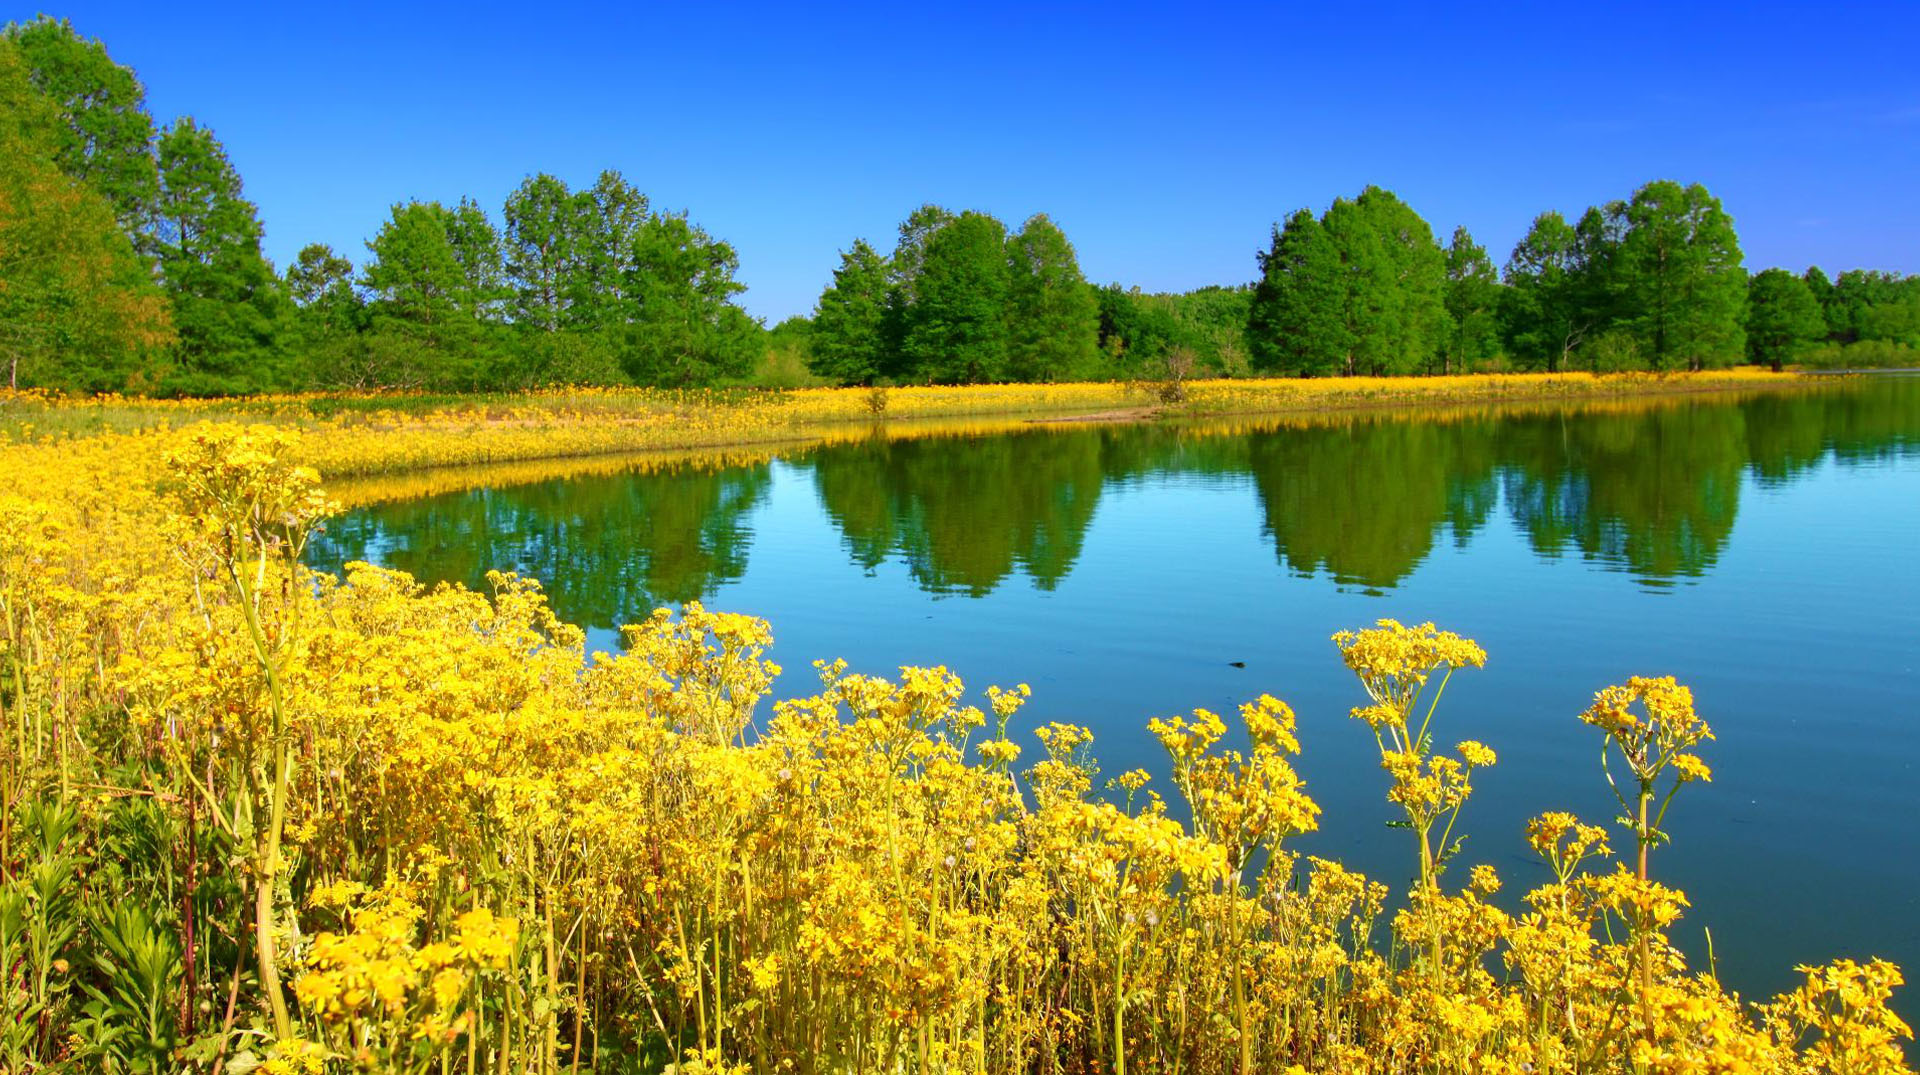 A pond with yellow flowers and trees in the background.